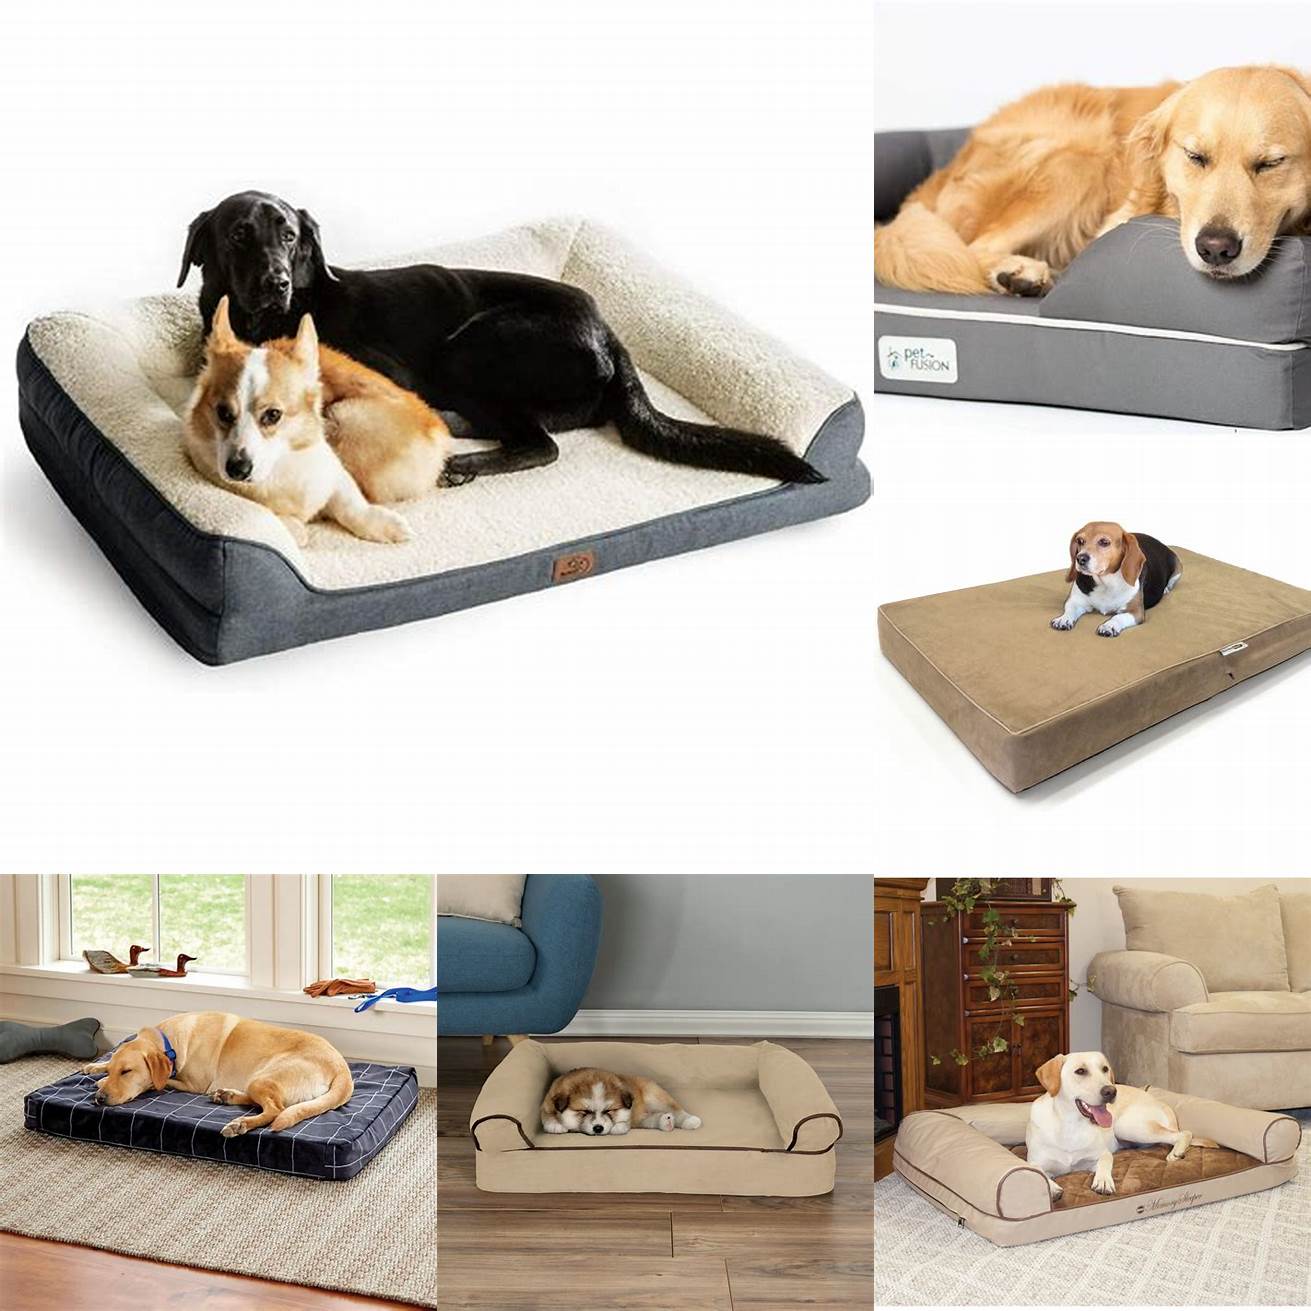 A small dog bed made from memory foam